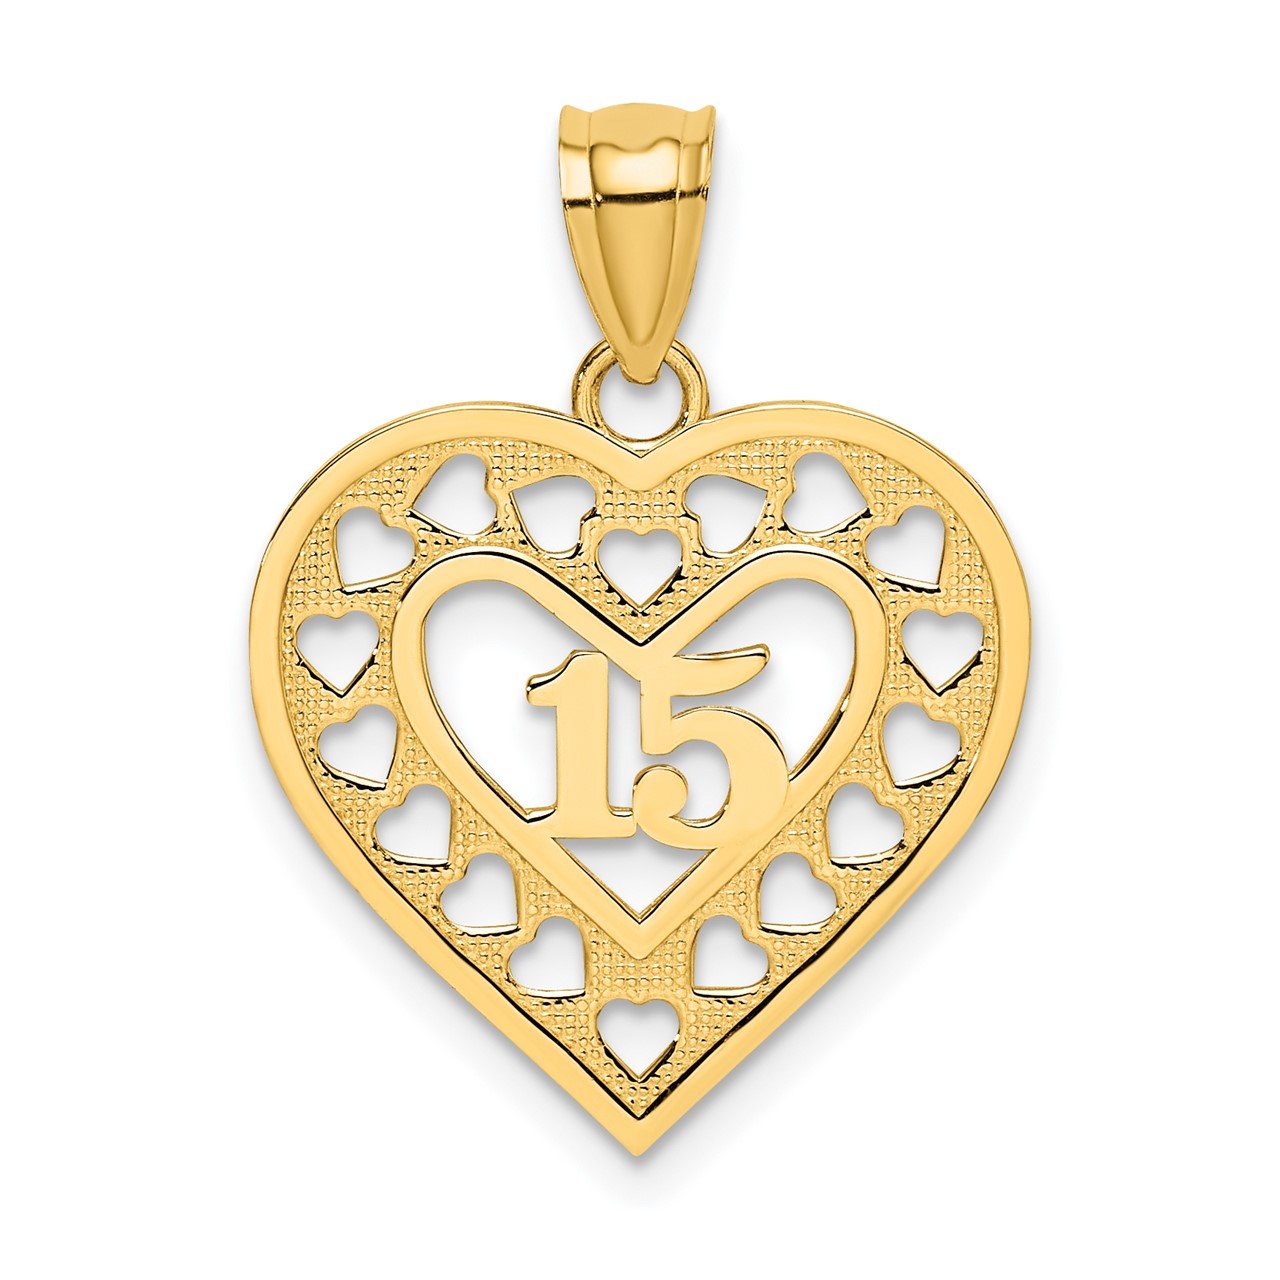 14K 15 in Cut-out Heart charm